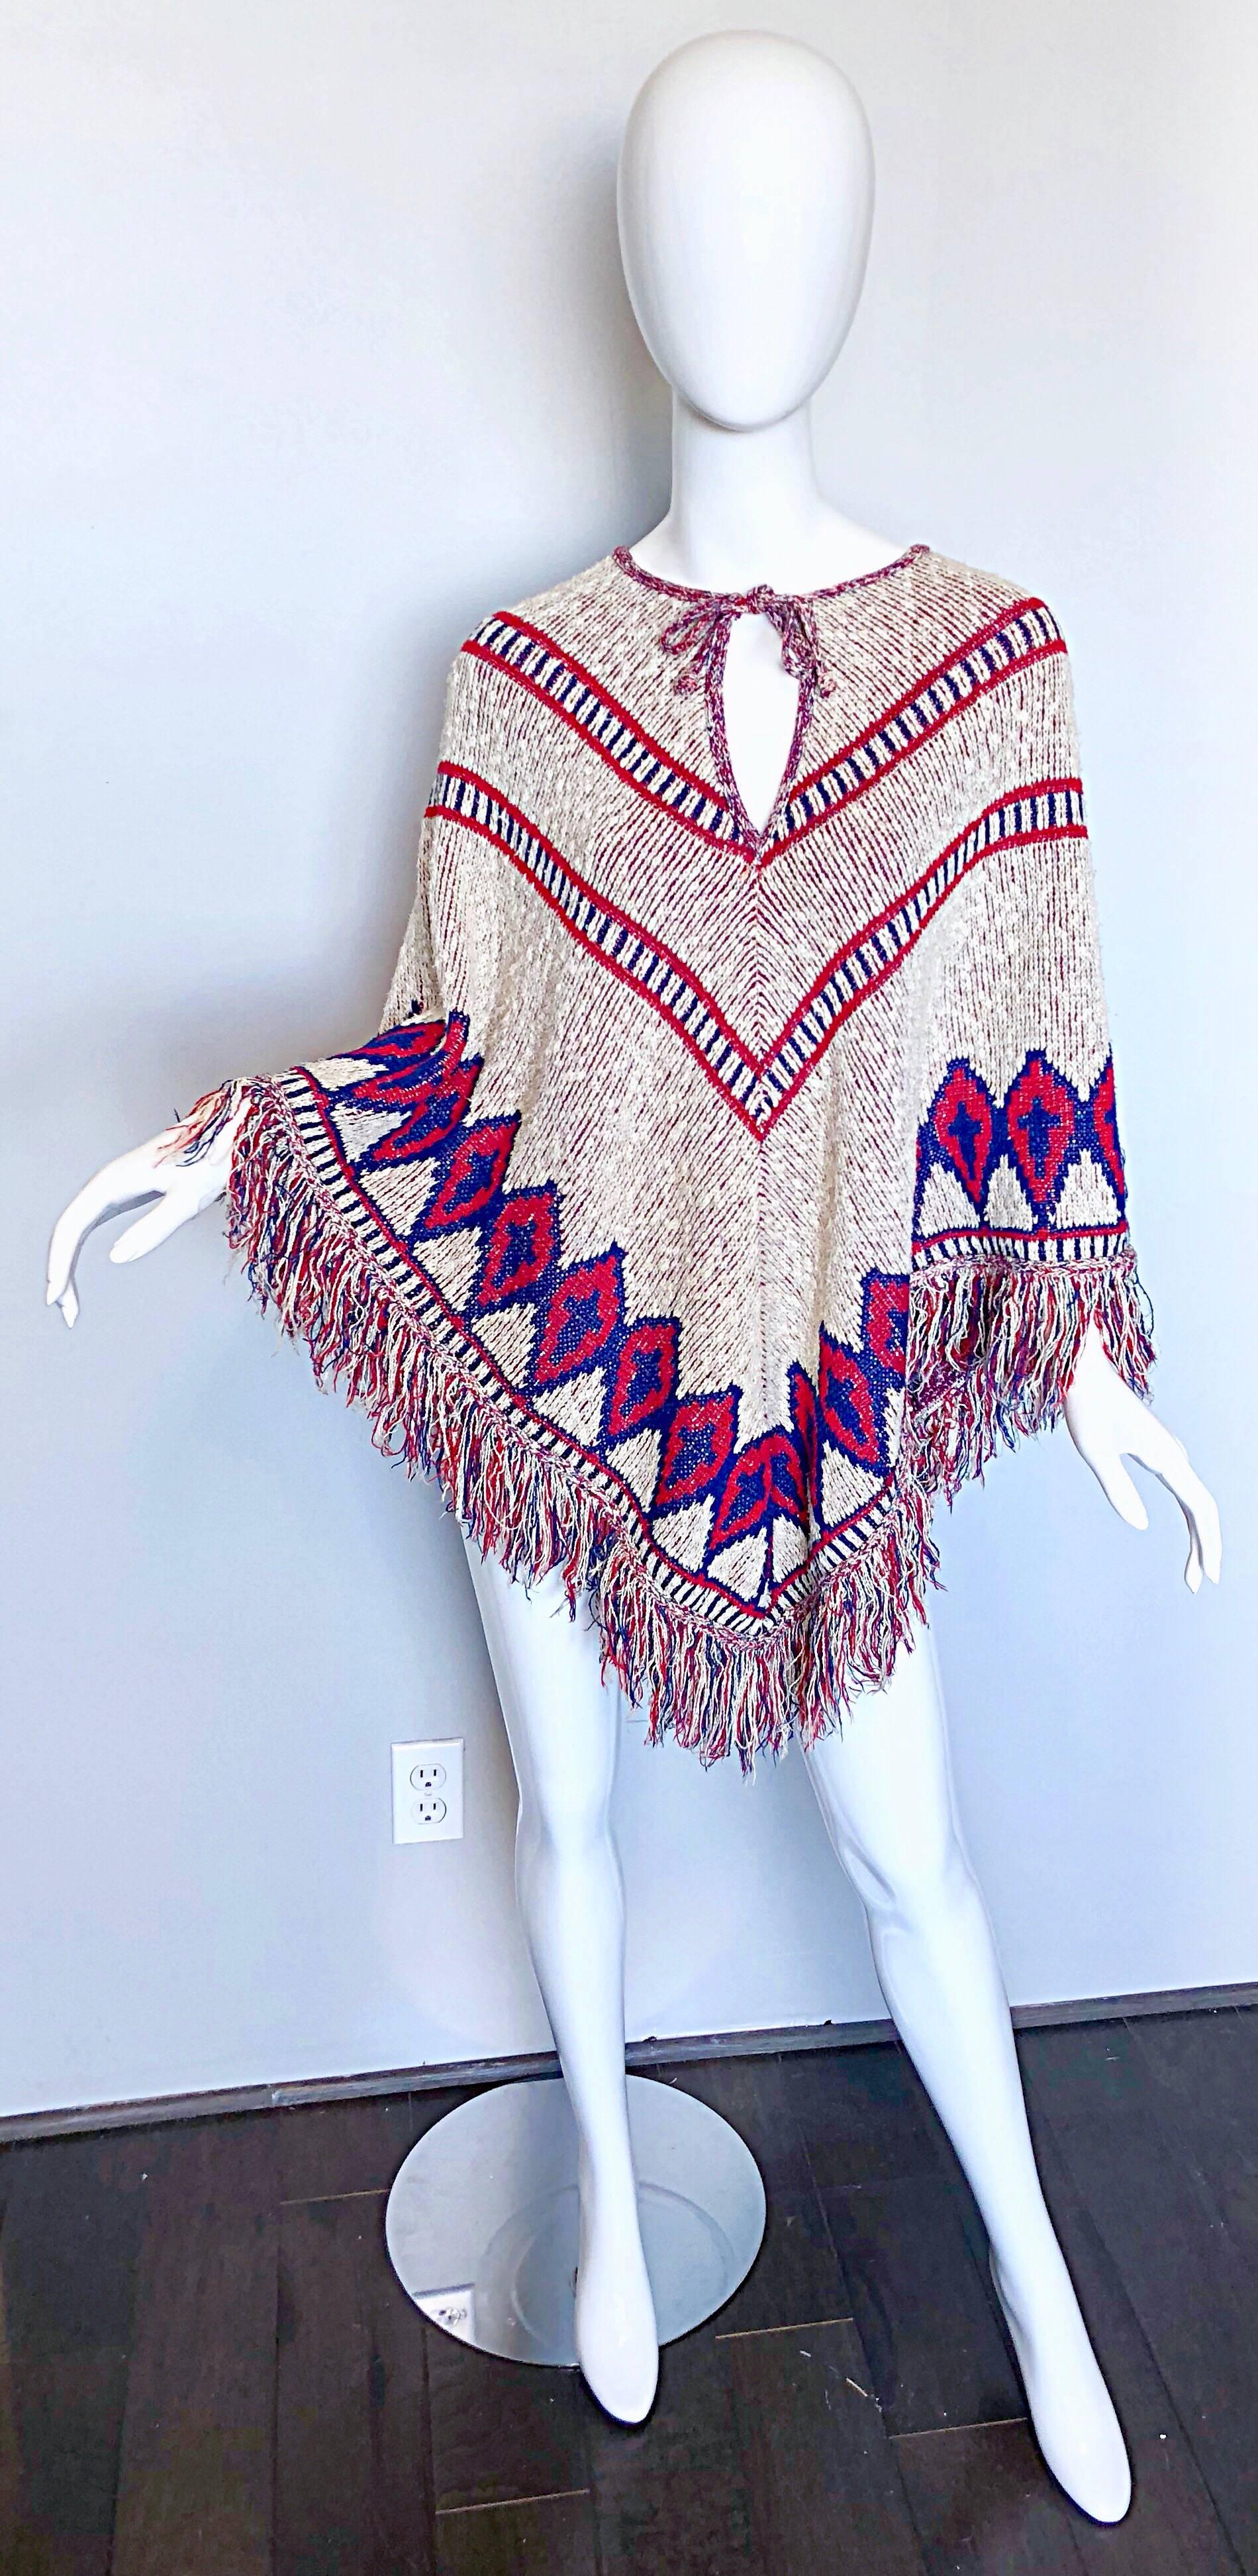 Incredible vintage 70s SAKS FIFTH AVE red, white and blue cotton knit hand-woven boho poncho cape! Features a Navajo inspired ethnic print throughout. Simply slips over the head--no armholes, so this is both easy to wear and super comfortable! Great